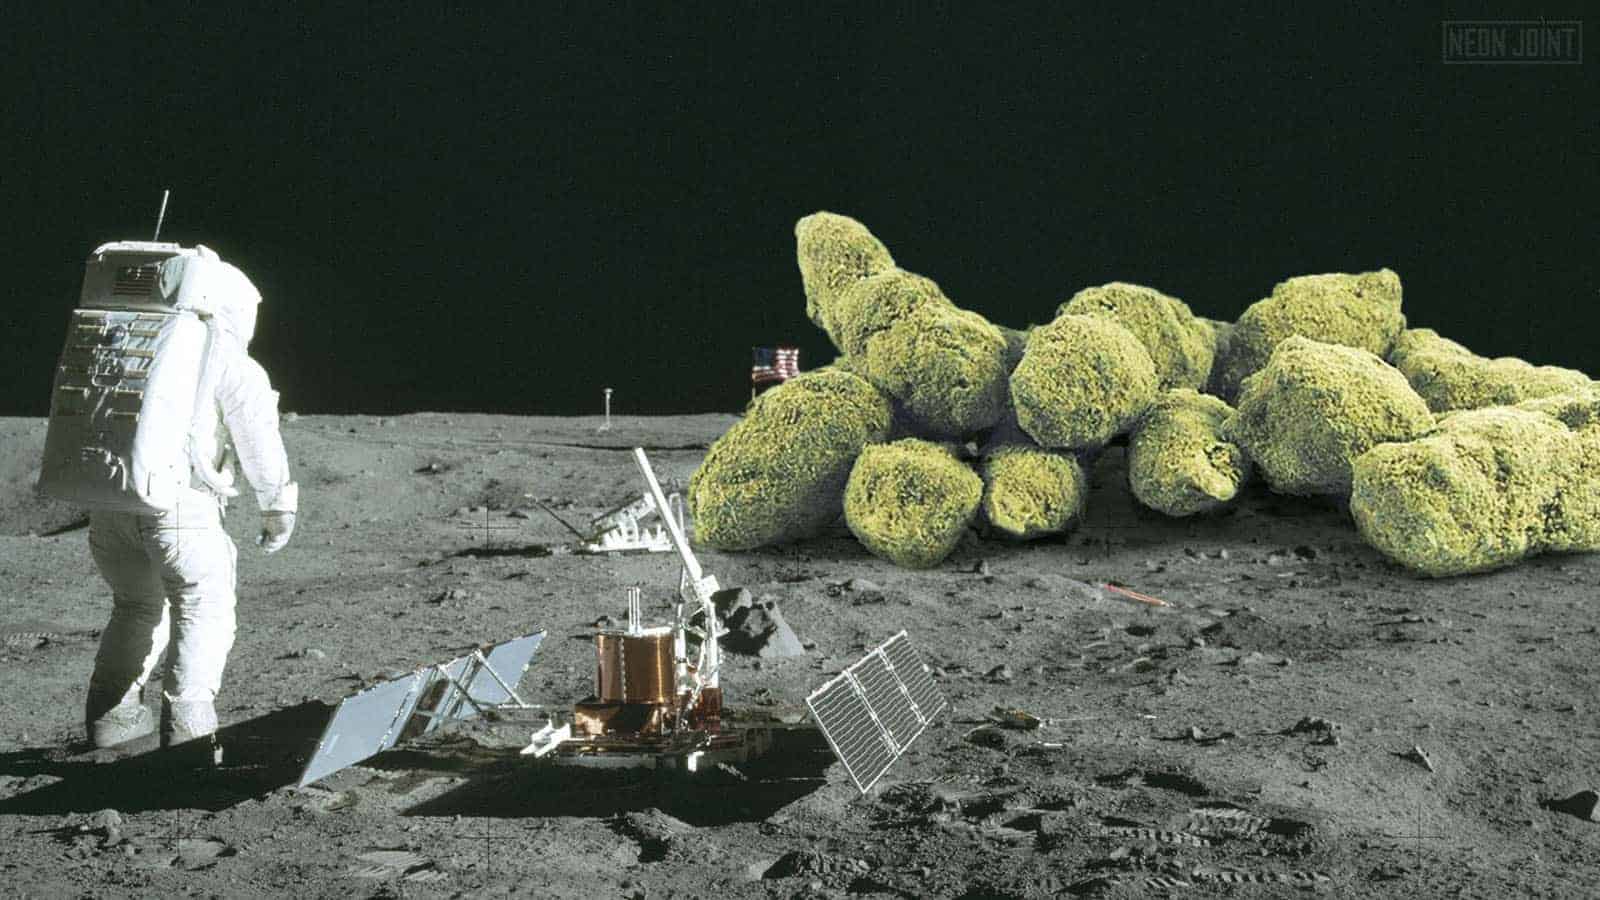 Moon Rocks One Giant Hit for Mankind